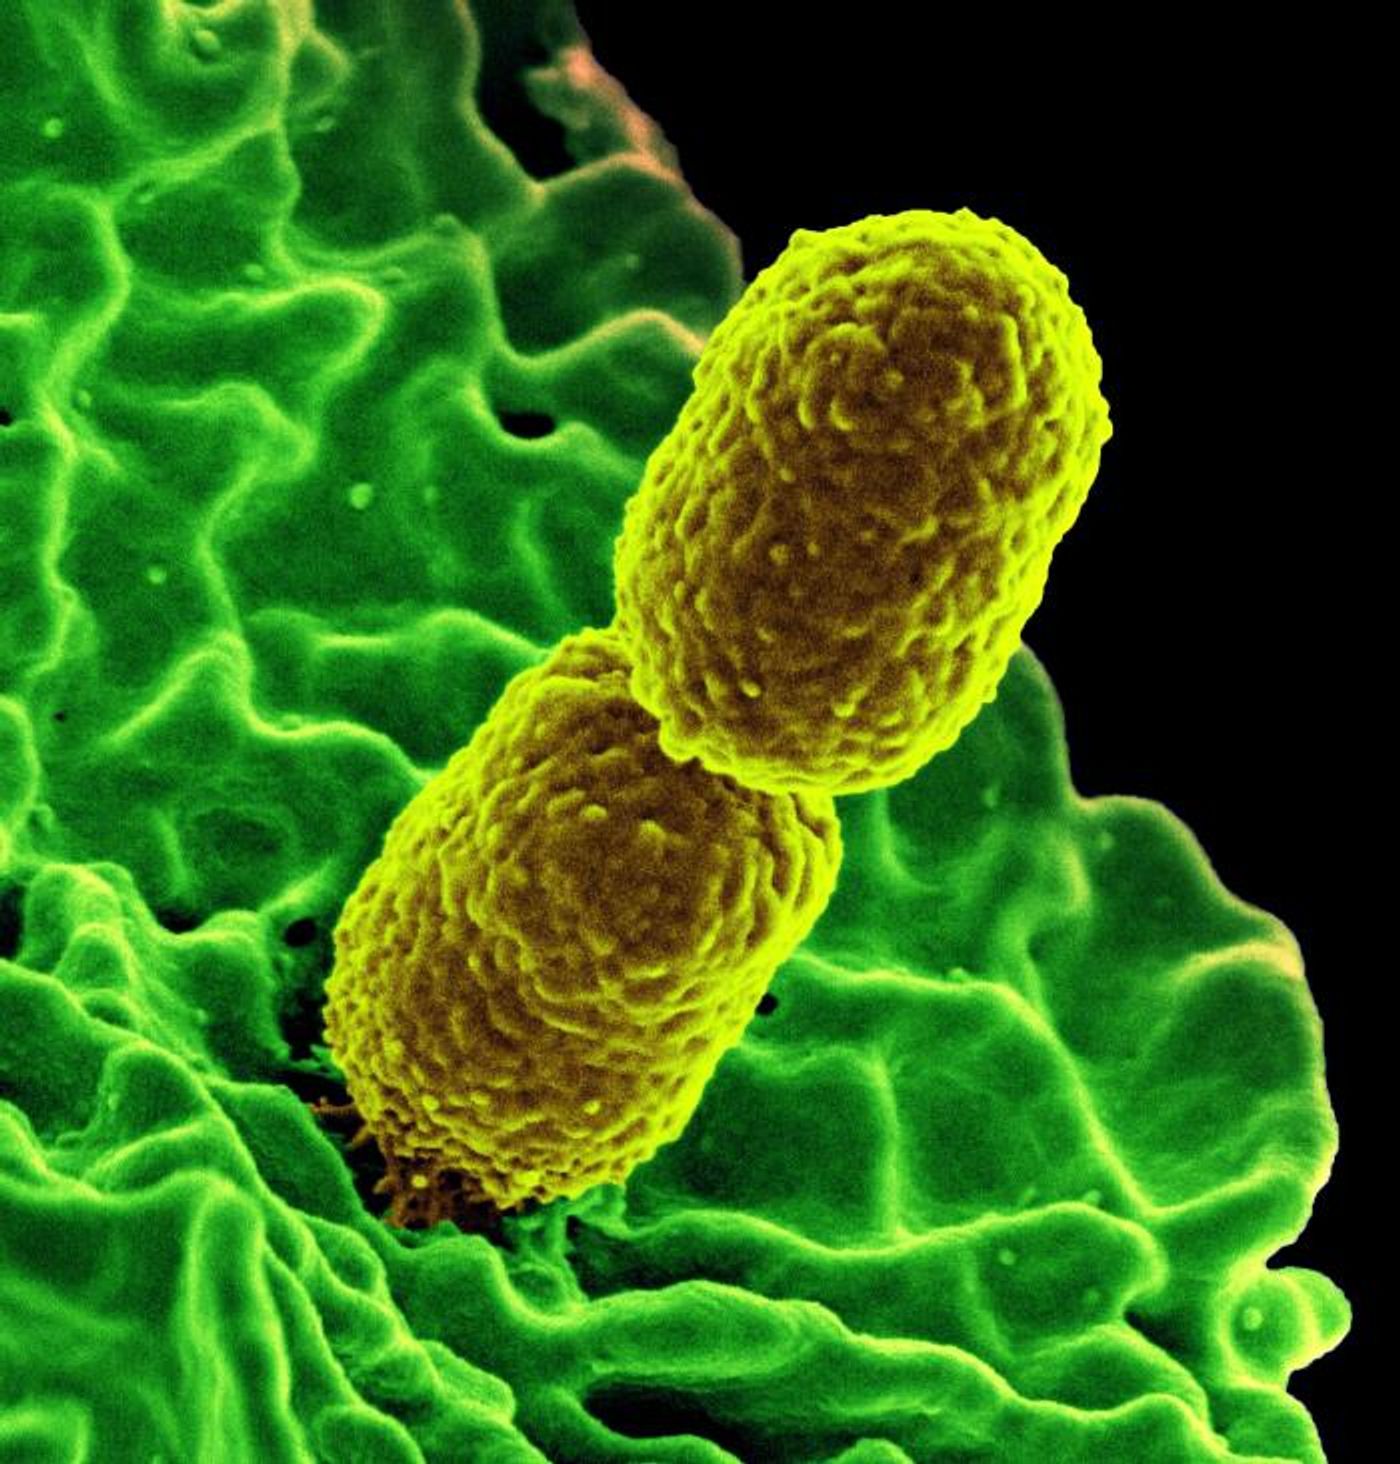 Produced by the National Institute of Allergy and Infectious Diseases (NIAID), this A digitally colorized scanning electron microscopic image of two, mustard-colored, rod-shaped, carbapenem-resistant Klebsiella pneumoniae (CRKP) bacteria, interacting with a green-colored, human white blood cells (WBC), known specifically as a neutrophil. / Credit: NIAID